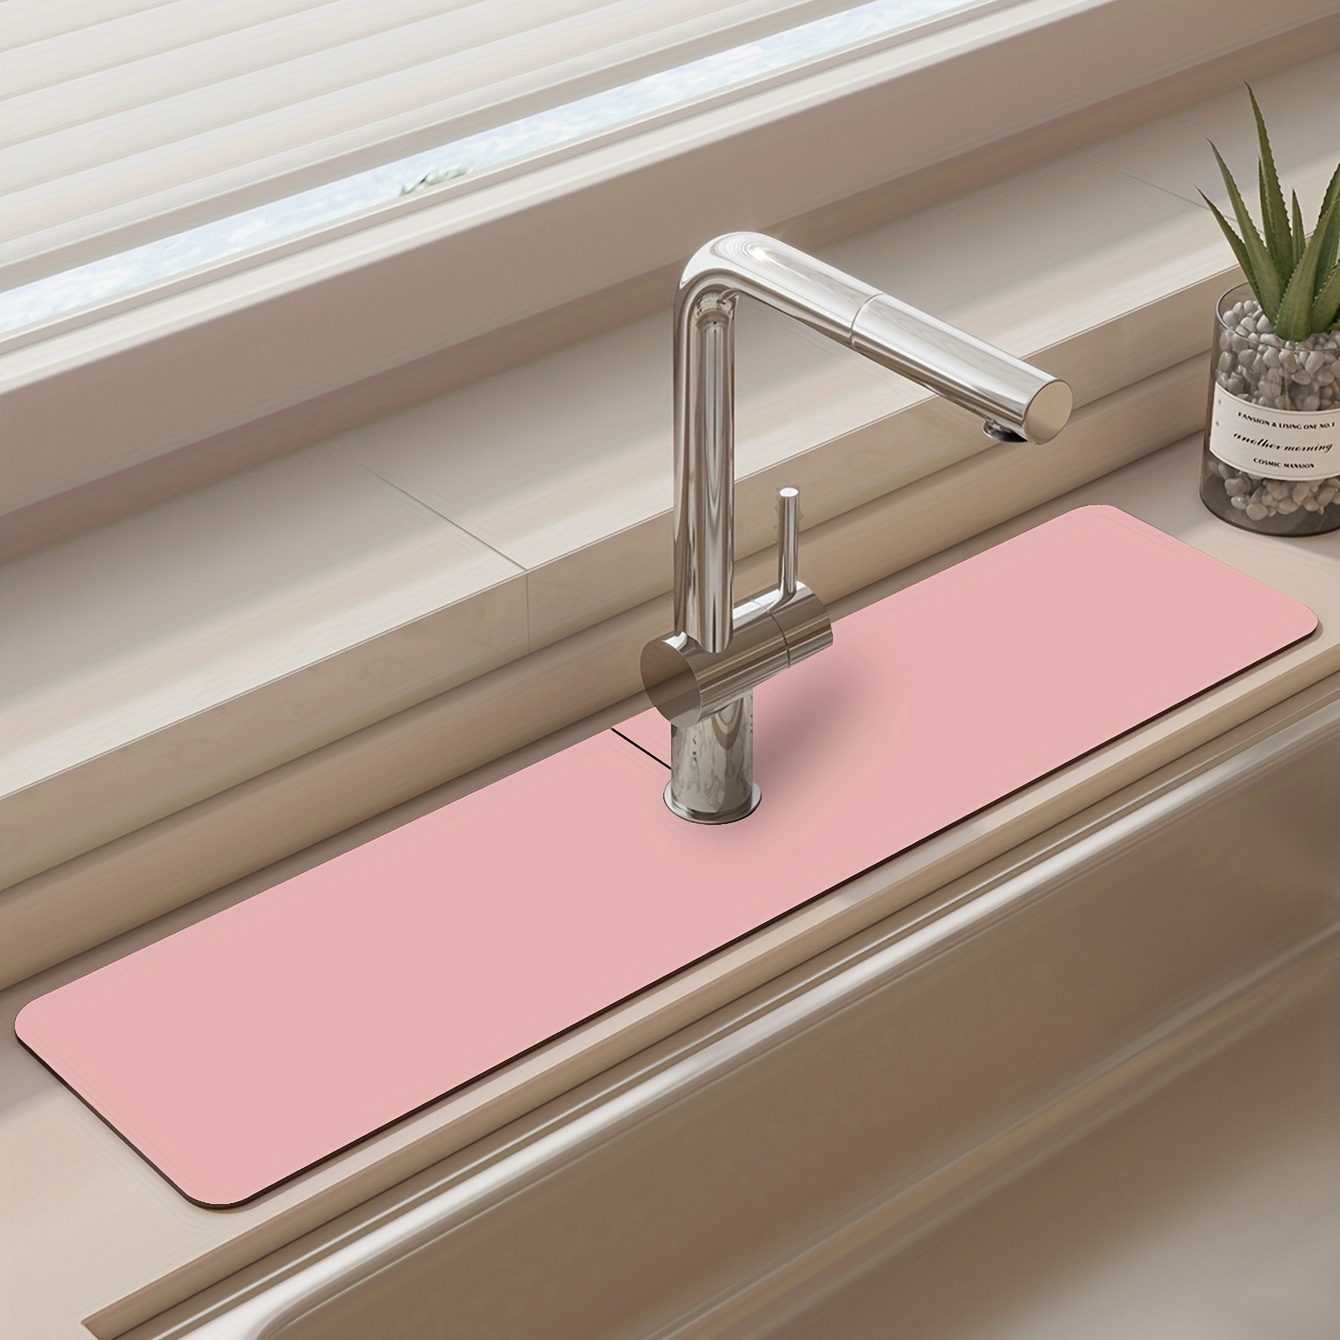 

1pc Simple Pink Pad, Diatomaceous Mud Faucet Suction Pad, Bathroom Faucet Splash Pad, Moisture-proof And Anti-skid Faucet Pad, Kitchen Countertop Accessories